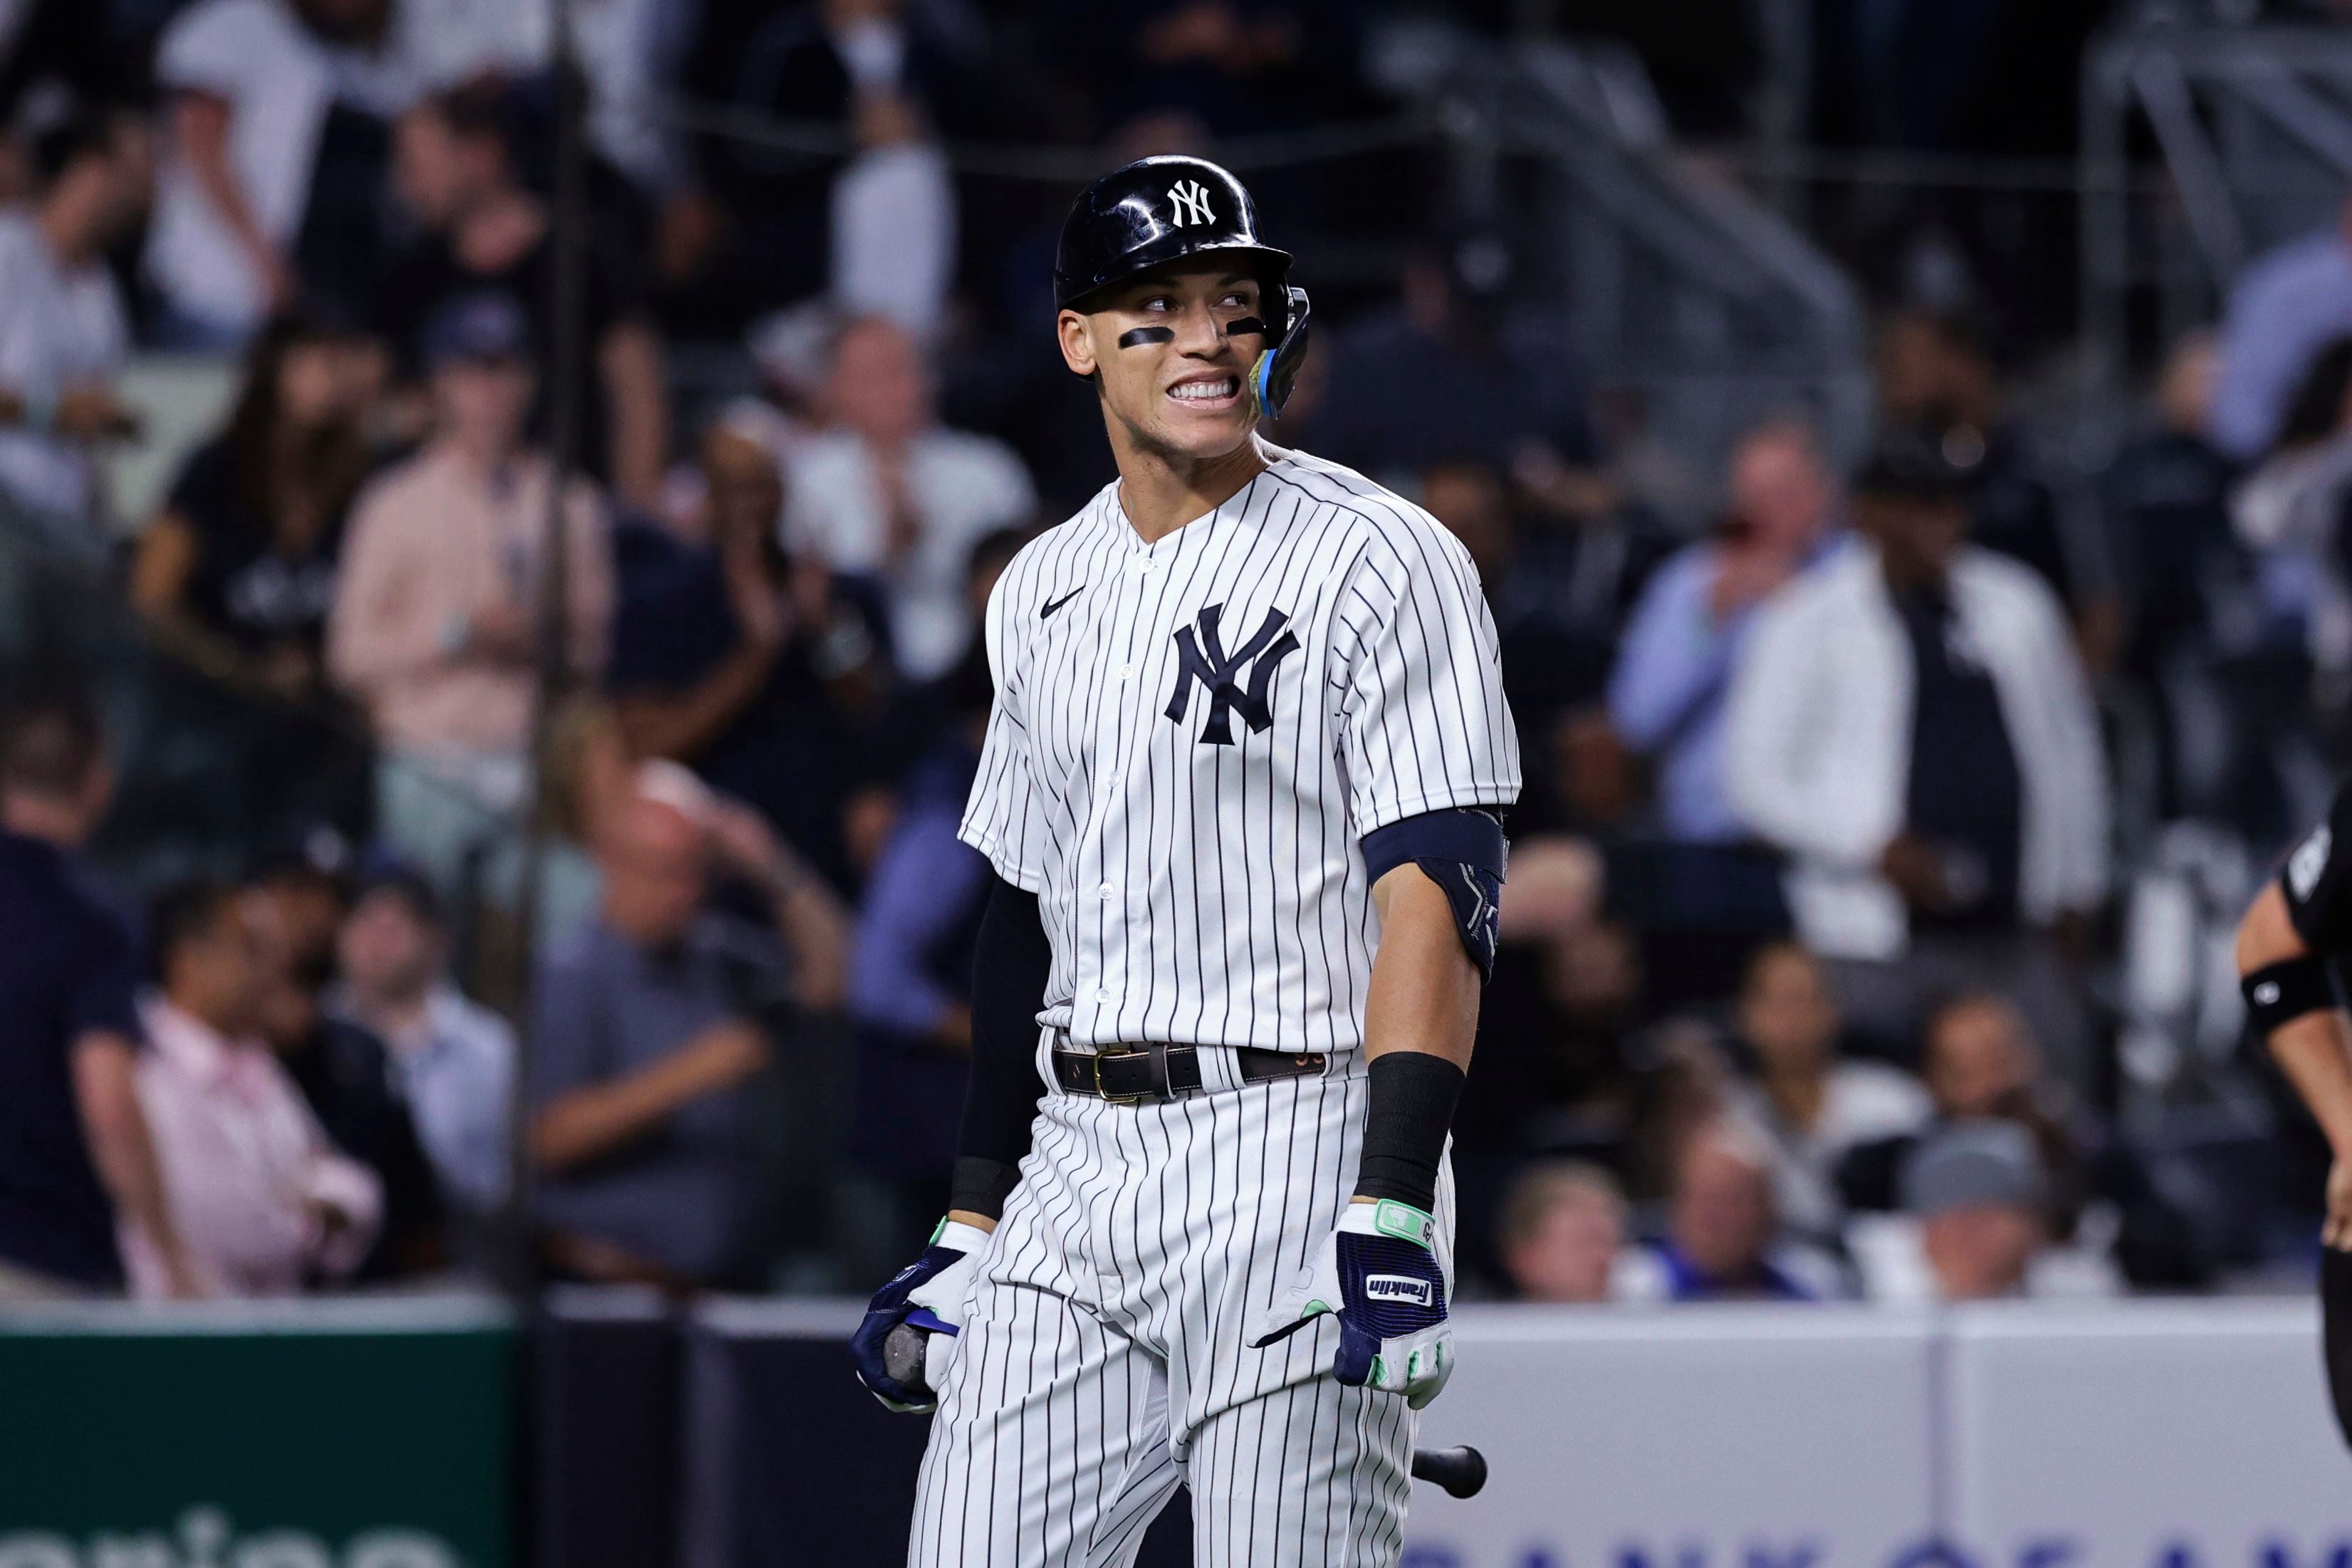 Aaron Judge hits 60th homer, within 1 of Maris' AL record